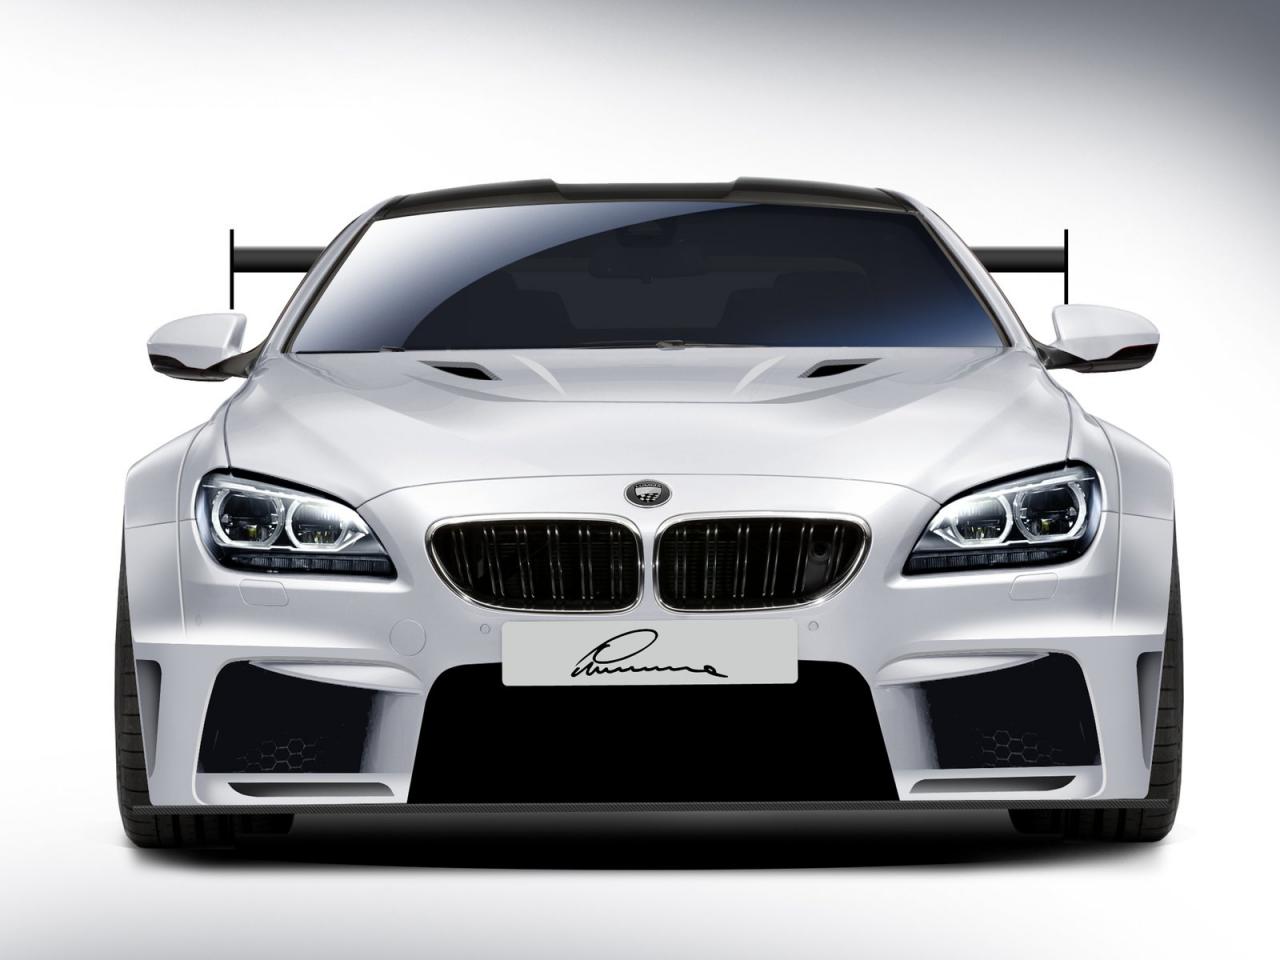 BMW CLR 6 M officially breaks cover